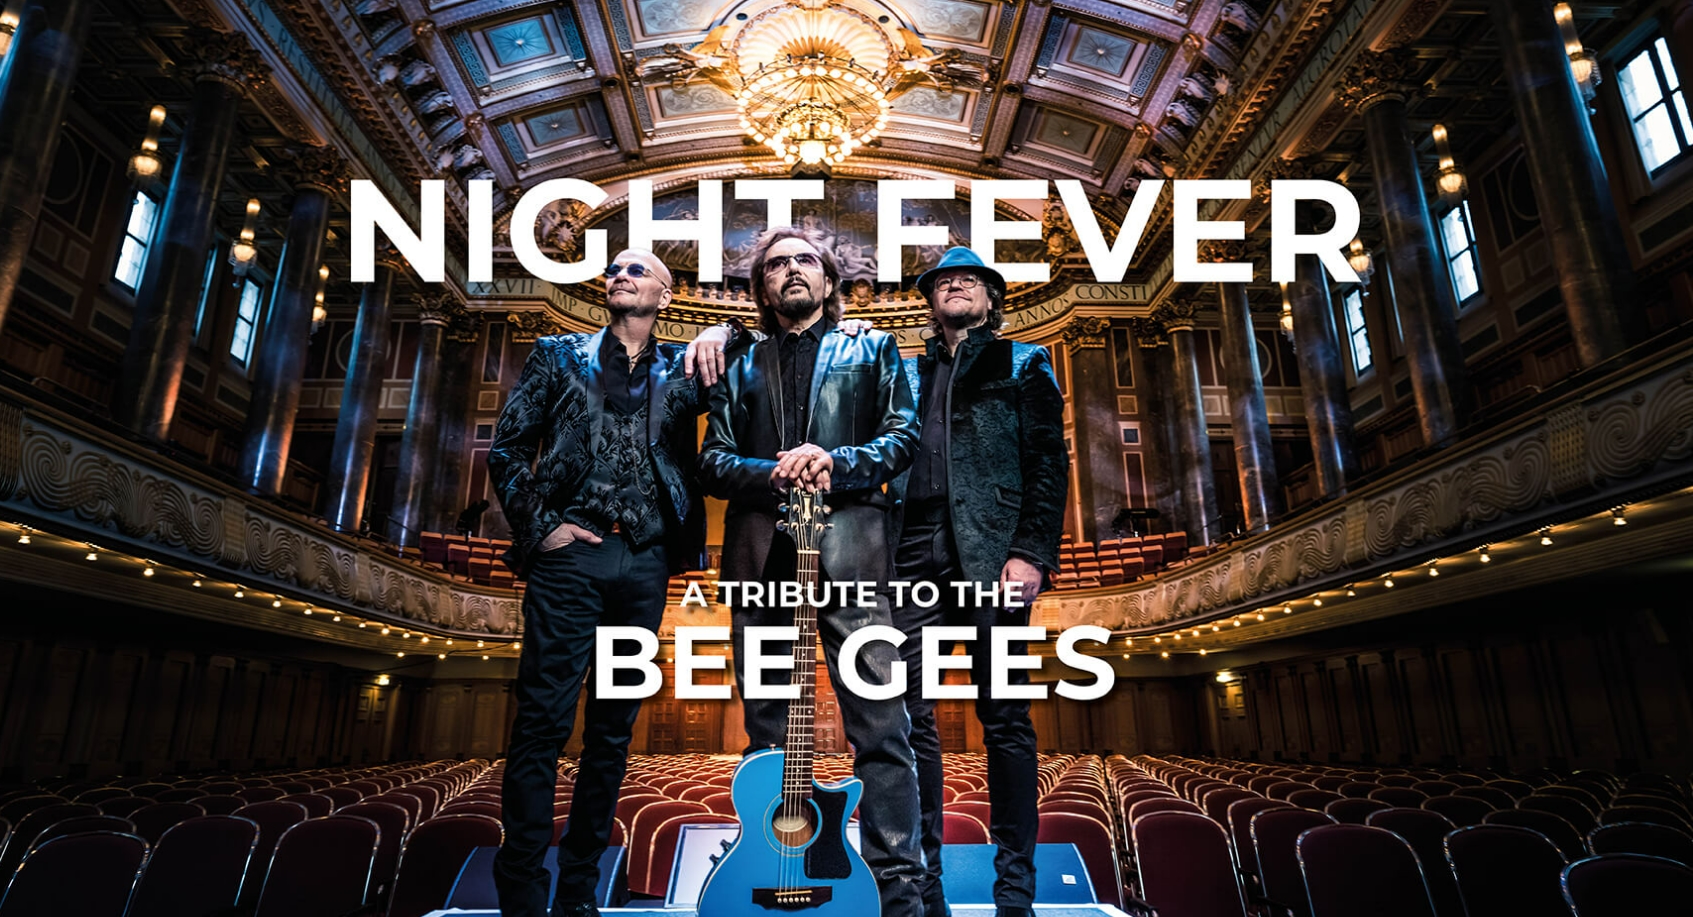 NIGHT FEVER: A TRIBUTE TO THE BEE GEES